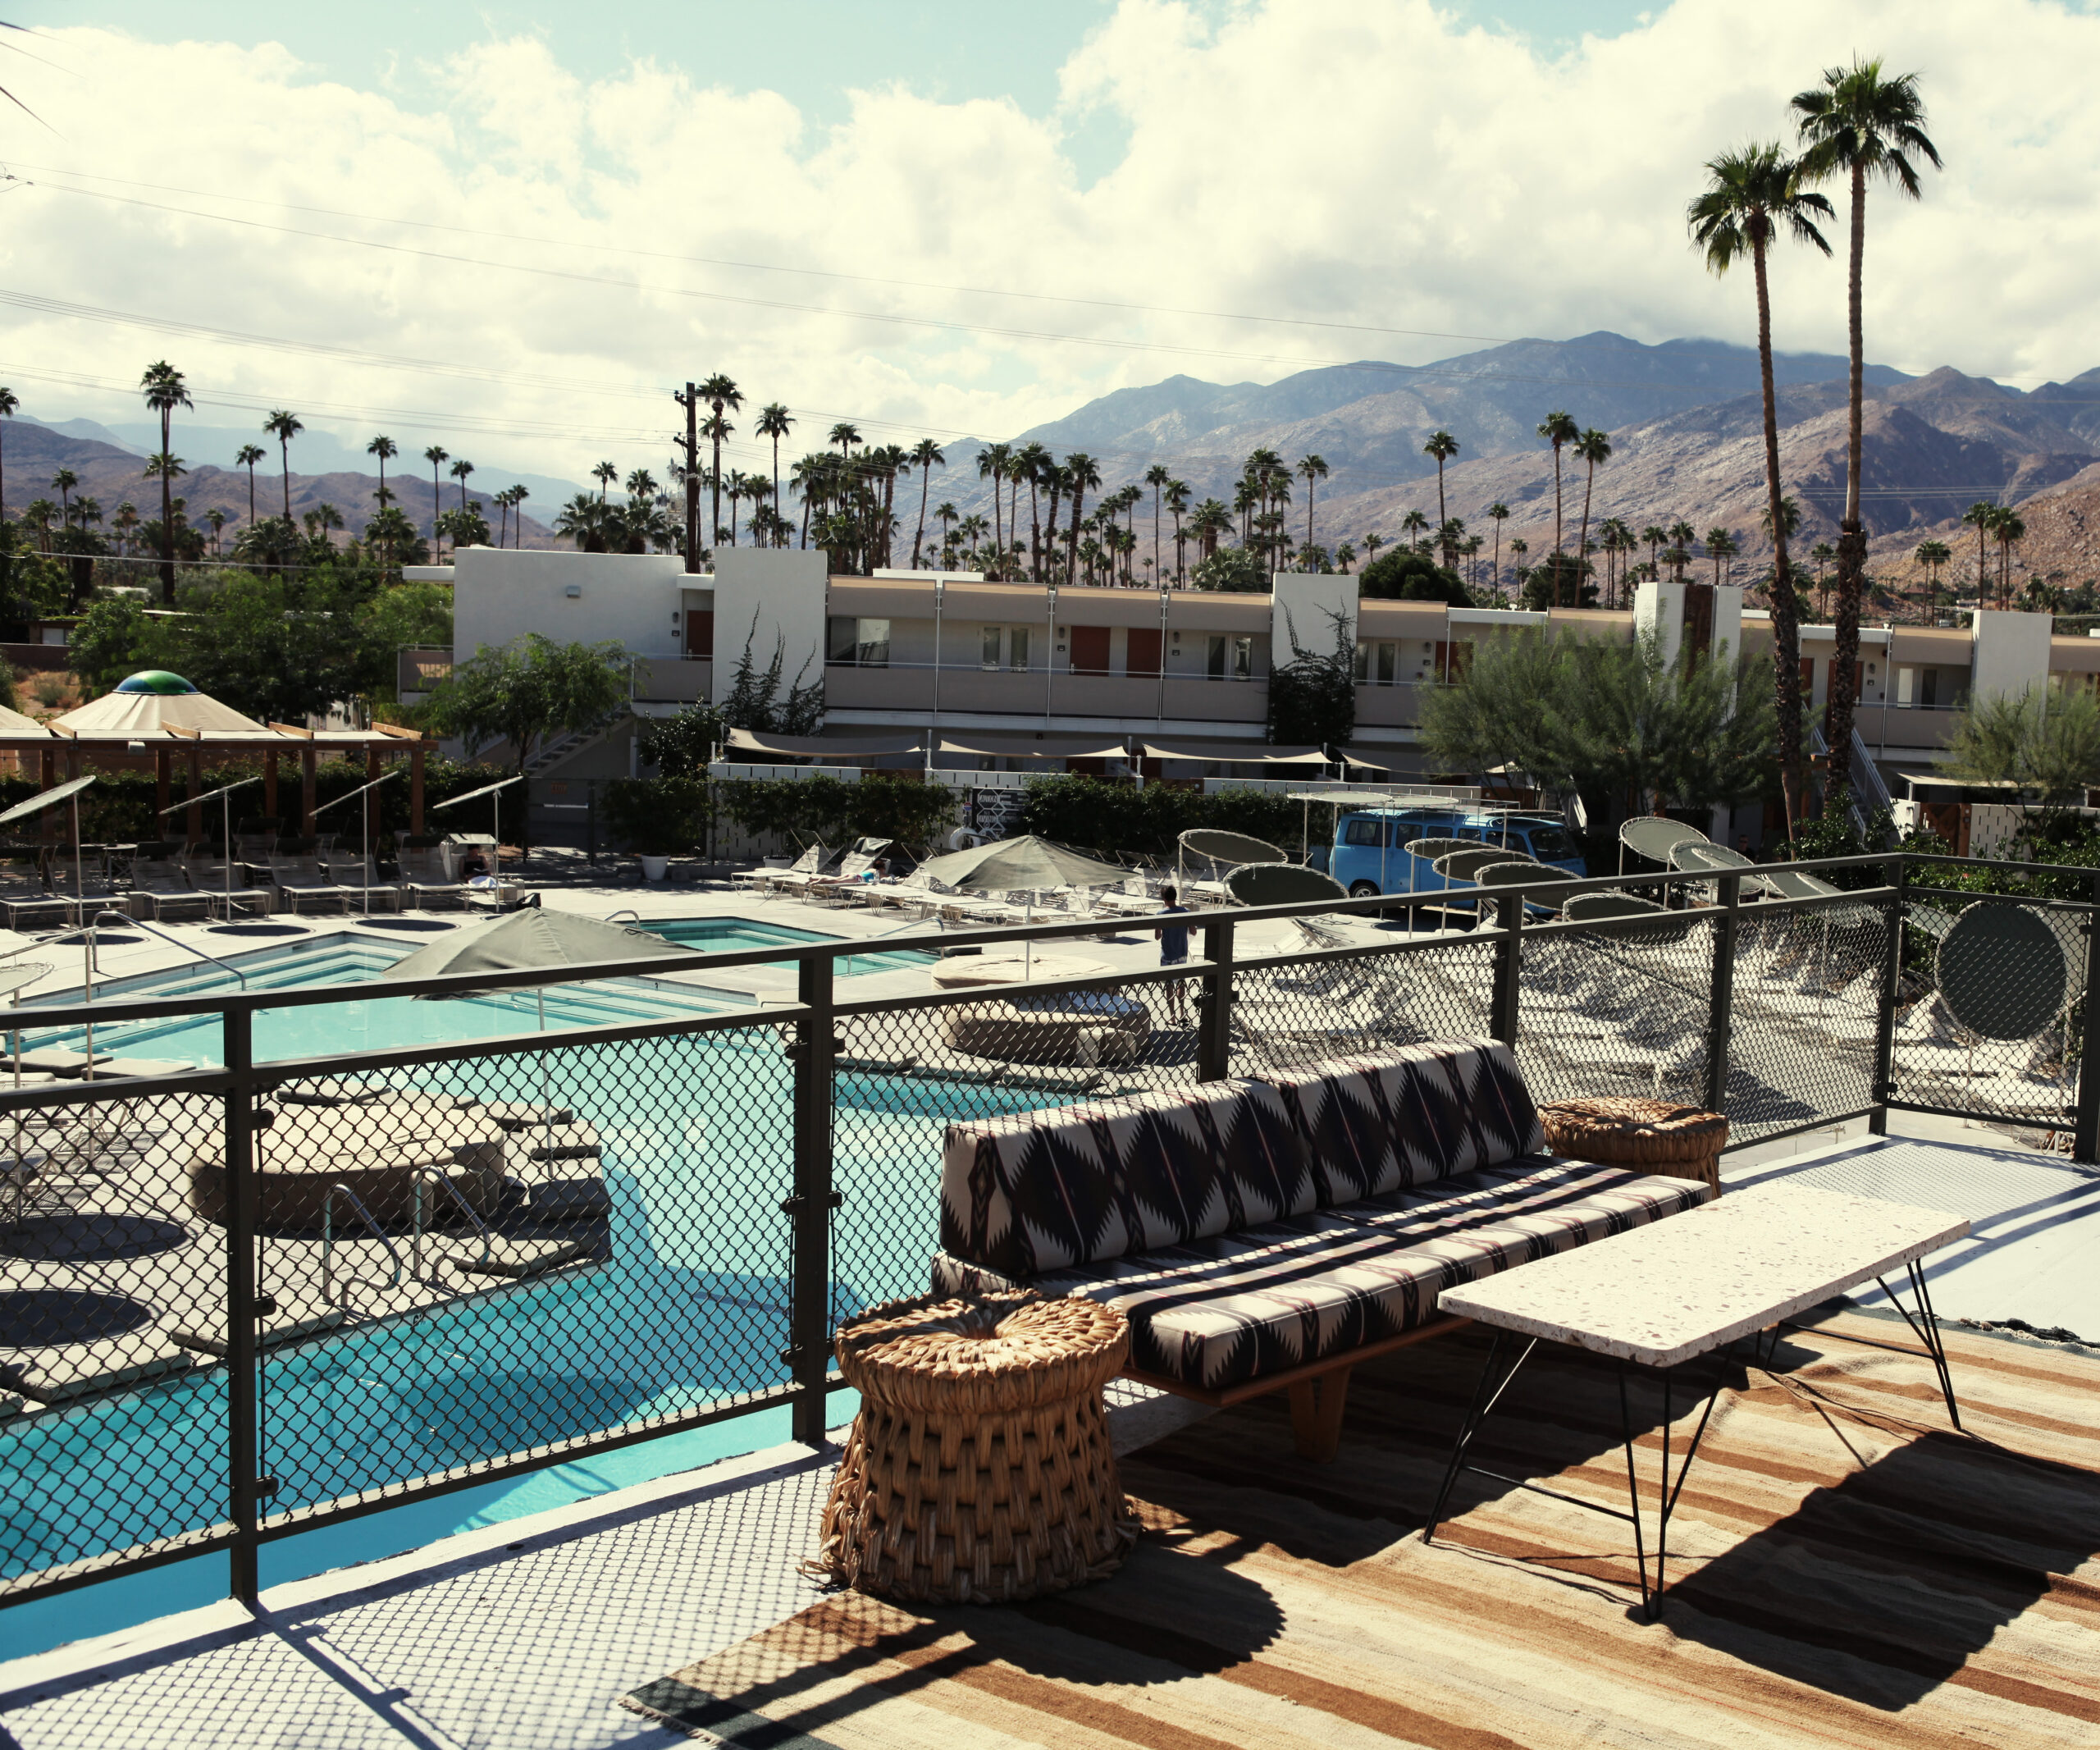 Why your next holiday should be to Palm SpringsWhy your next holiday should be to Palm Springs